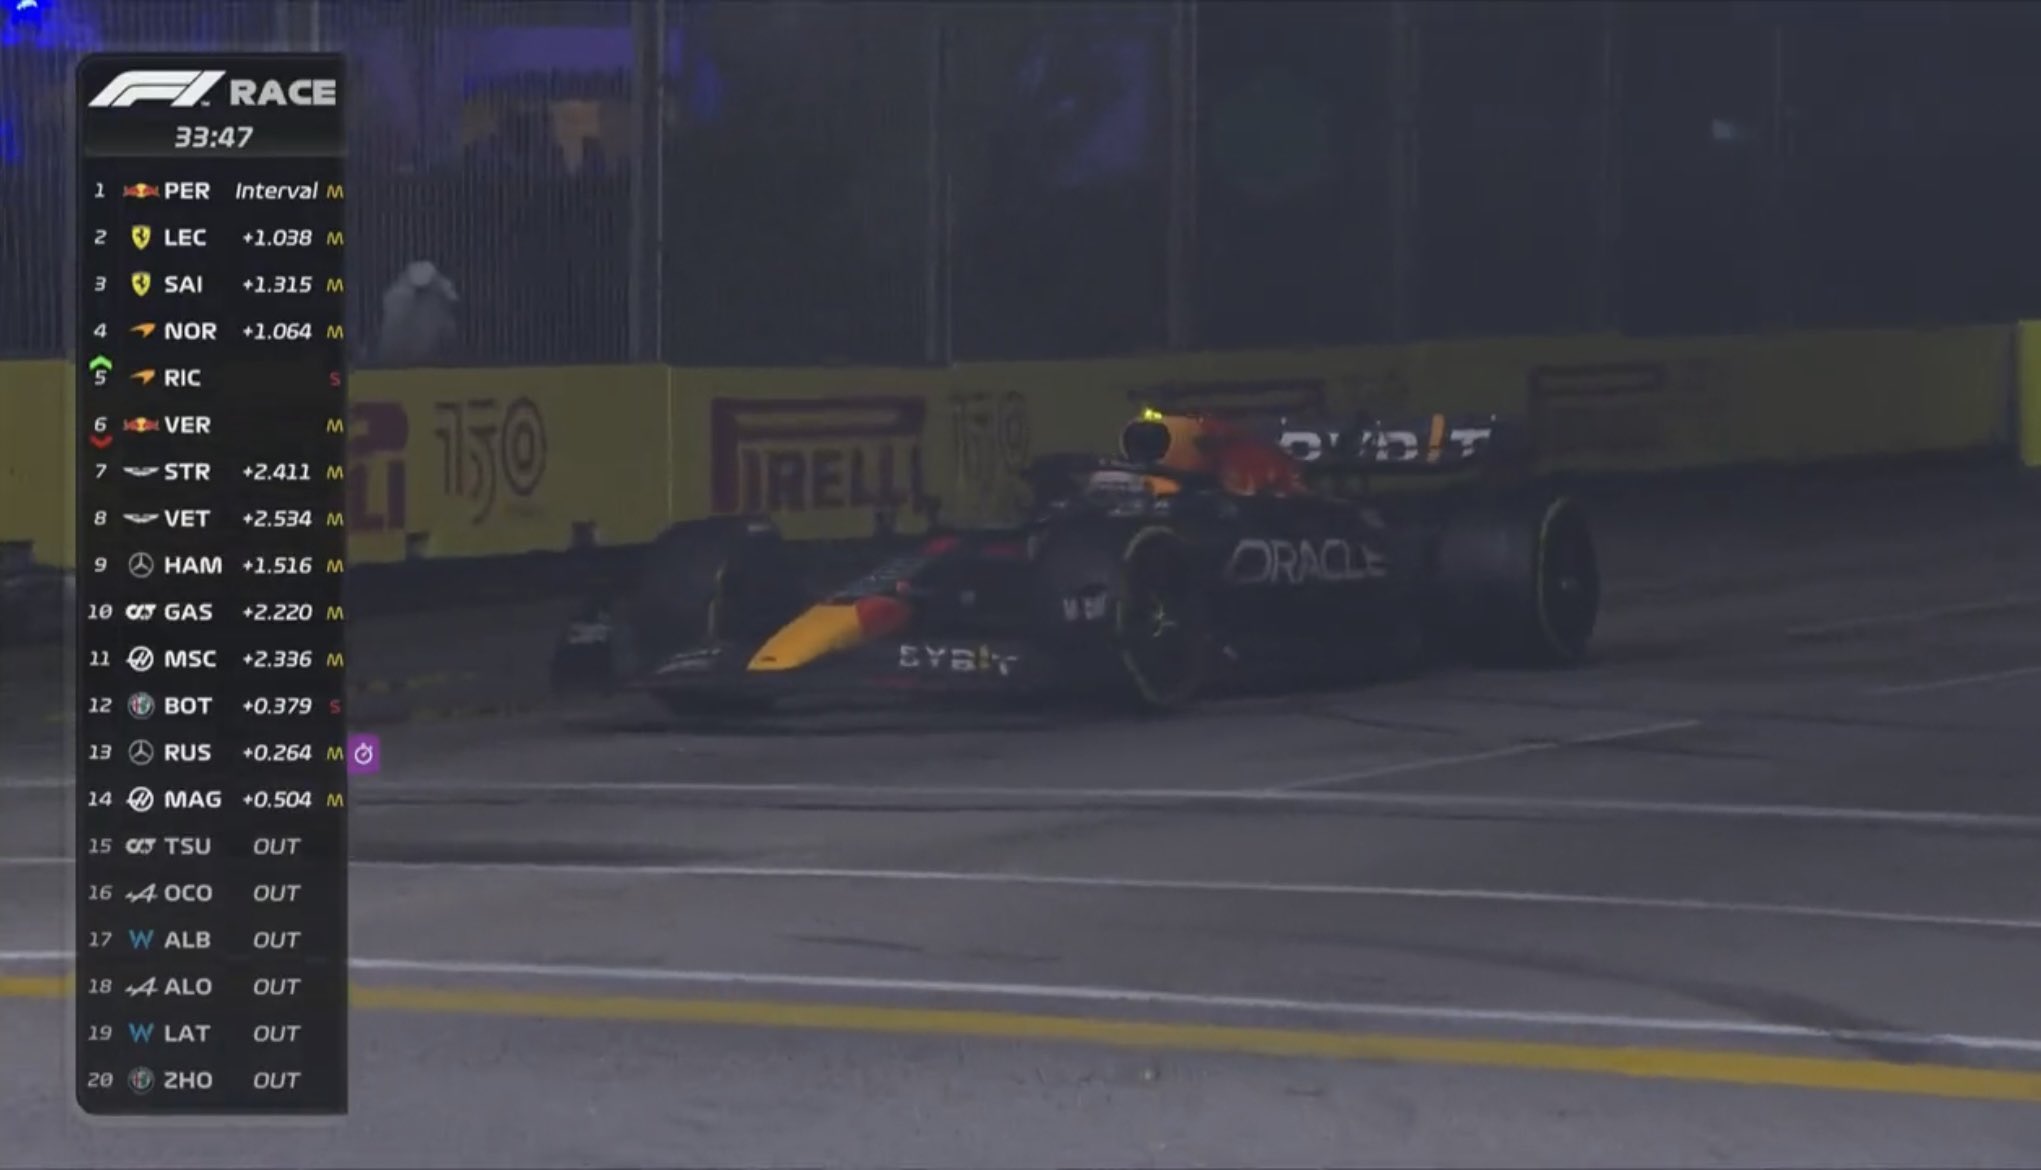 Singapore GP: Sergio Perez victorious ahead of Verstappen and Hamilton (Full results)